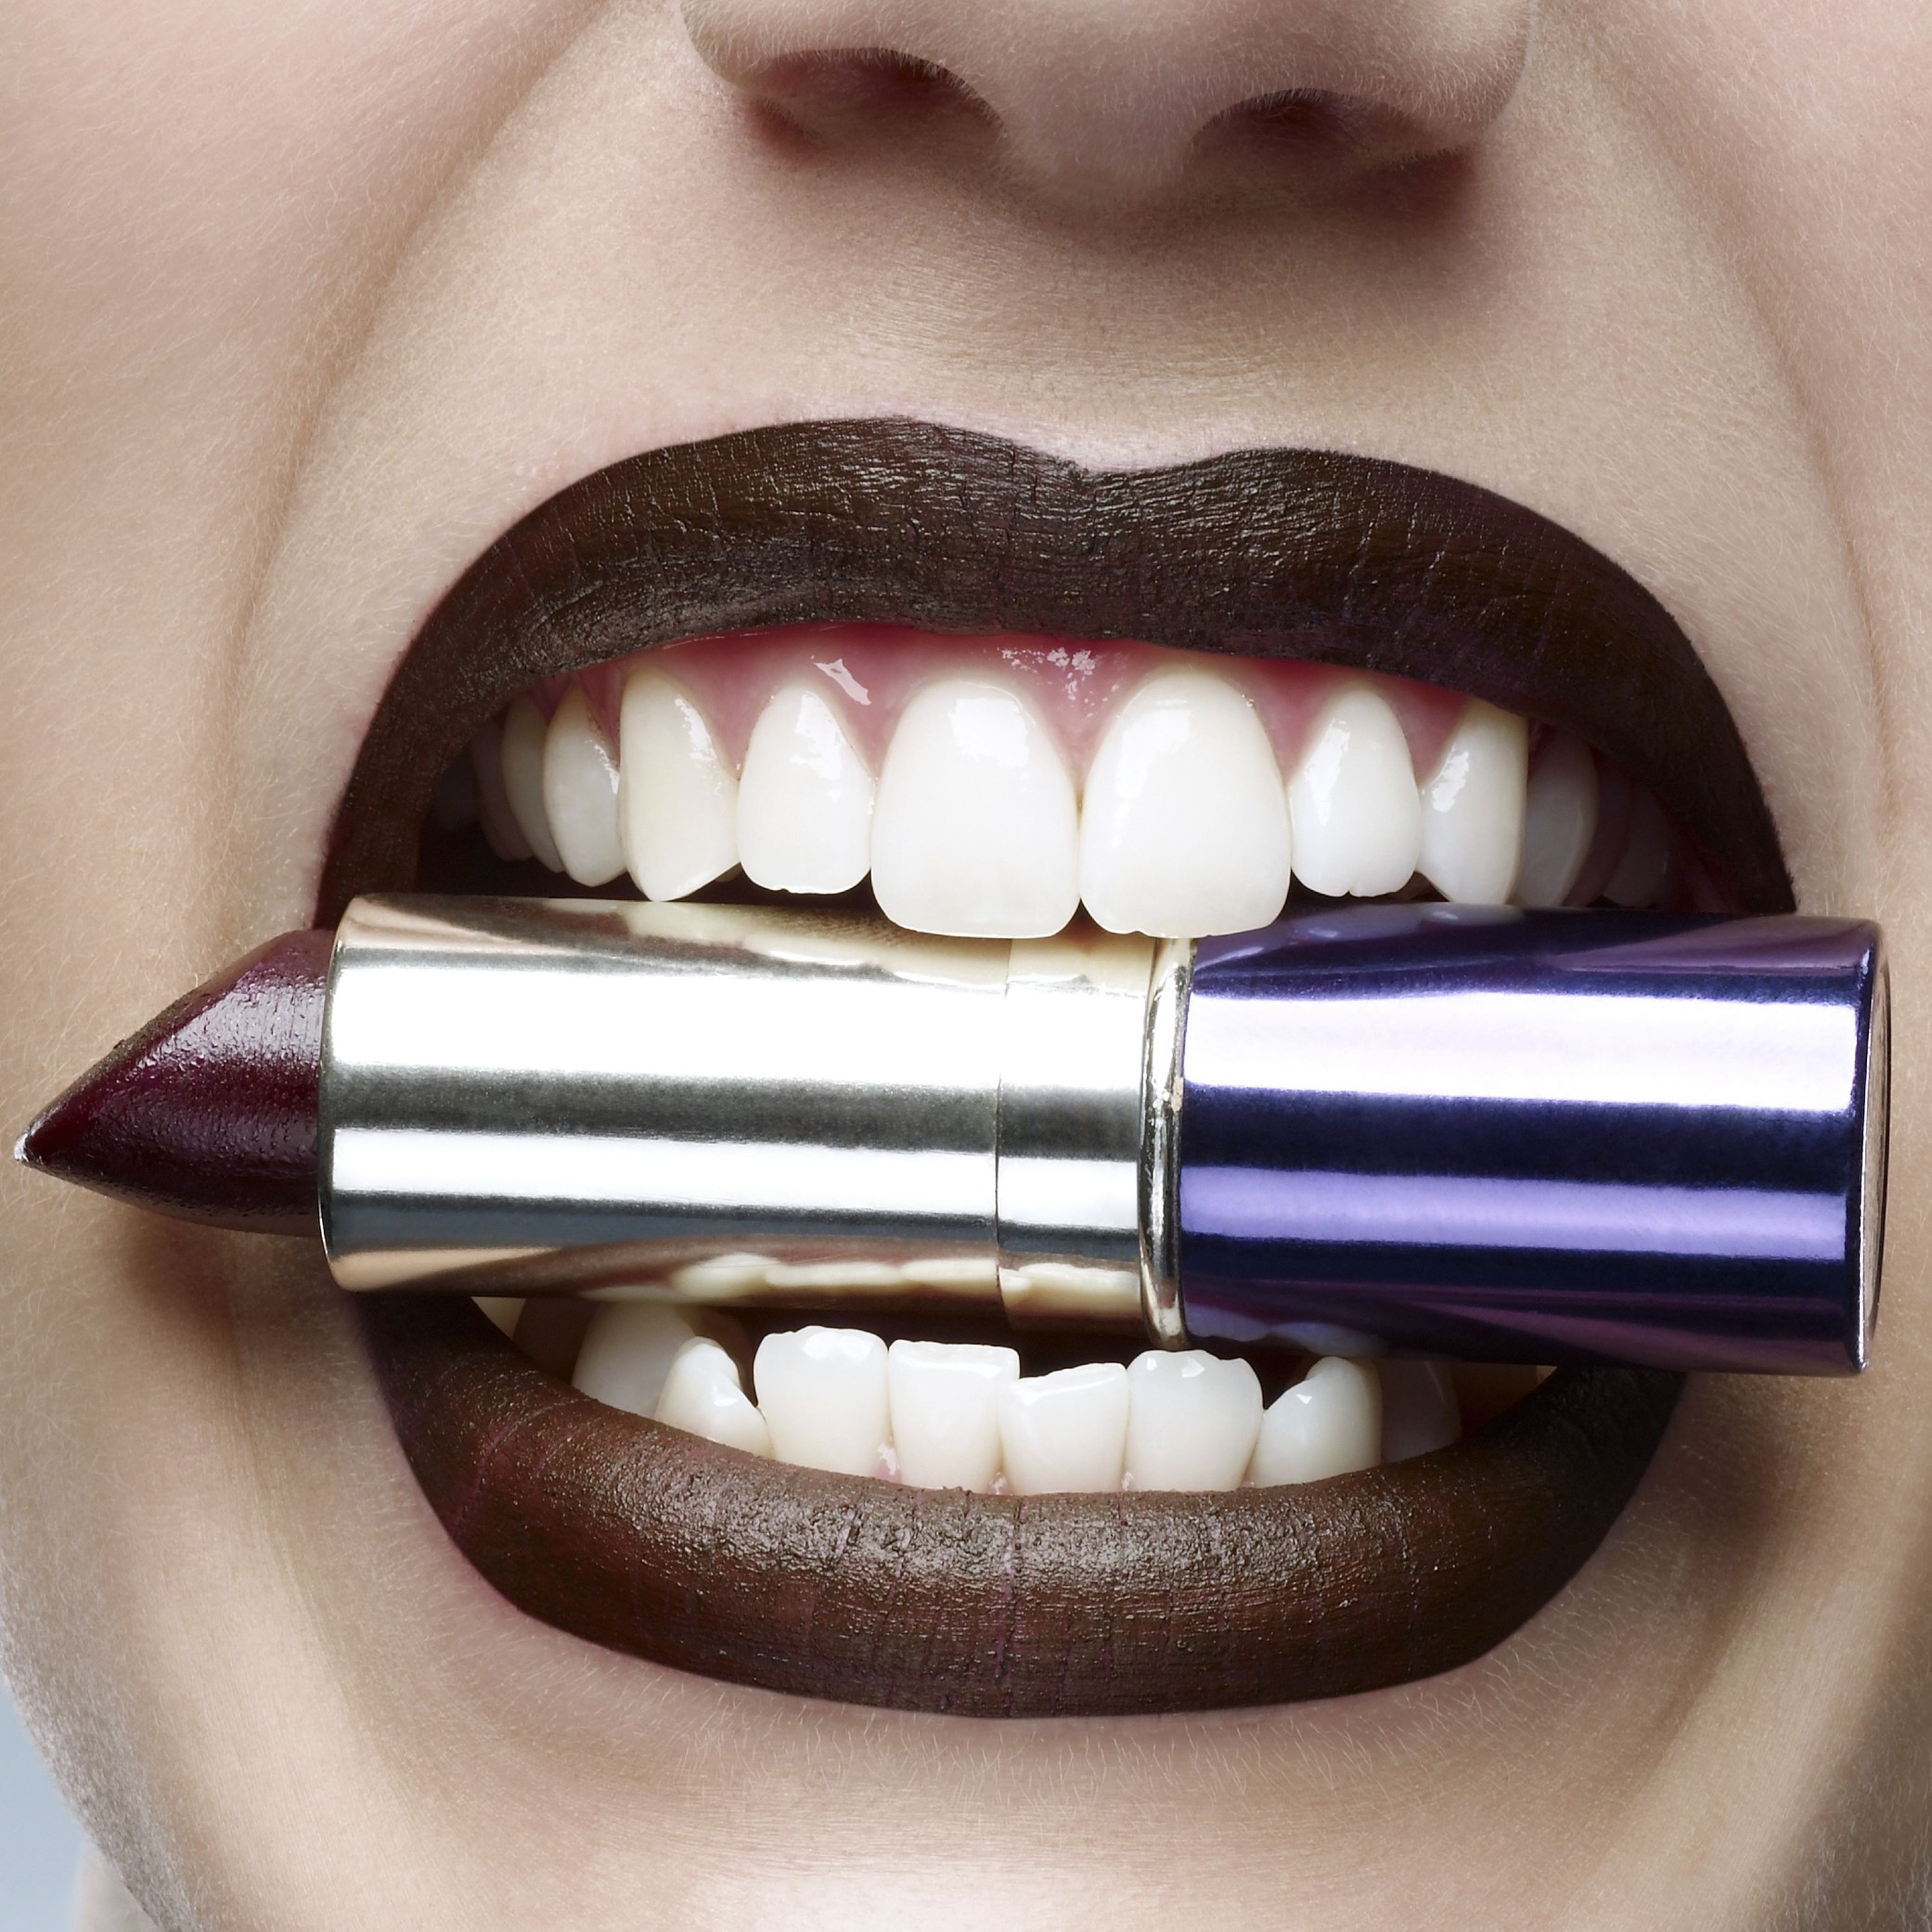 Eight facts about makeup that will shock you